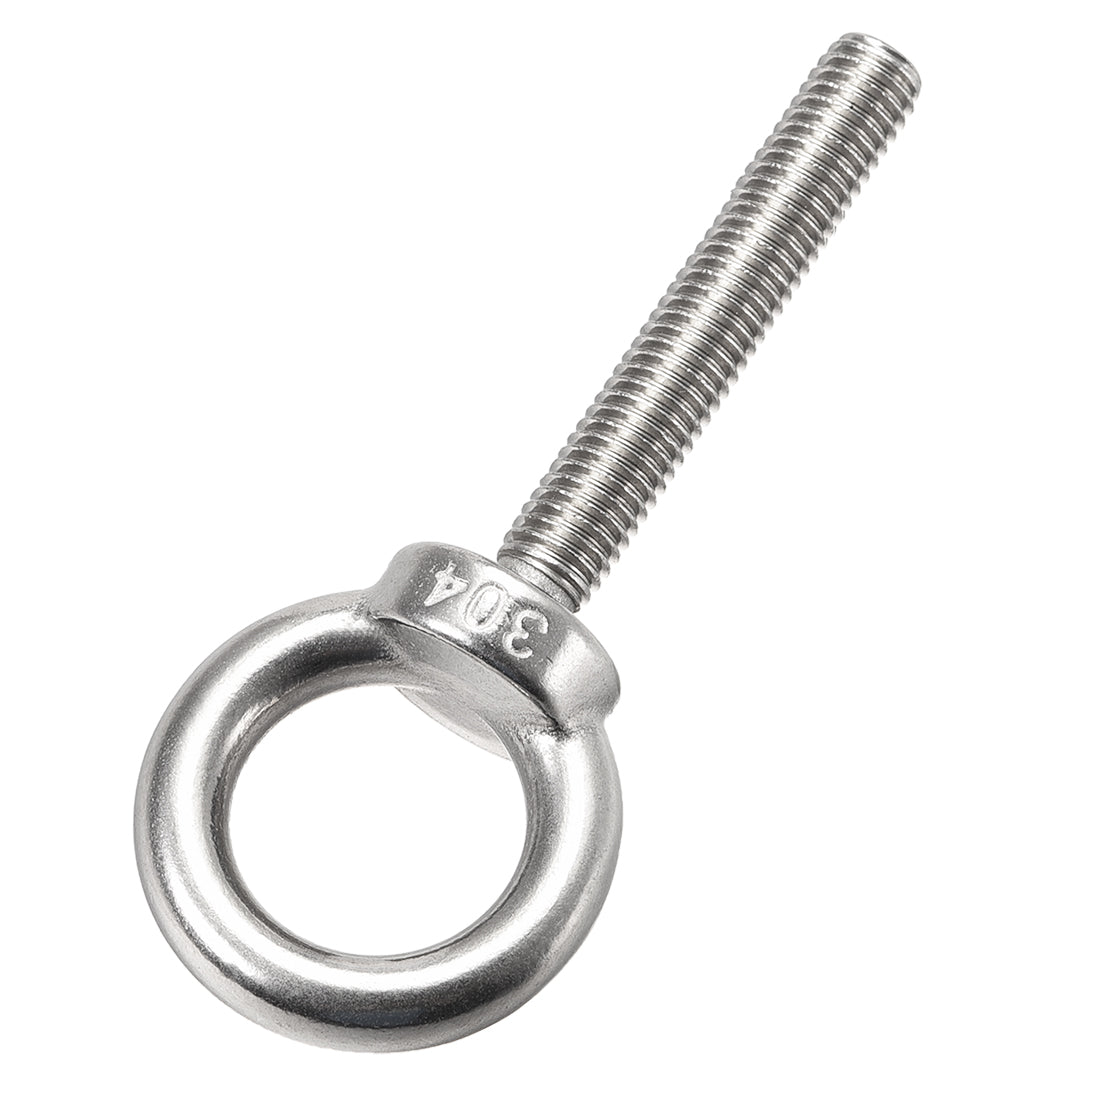 uxcell Uxcell 2 Pcs M10x70mm Thread 25mm Inside Dia 42mm Outside Dia 304 Stainless Steel Lifting Eye Bolt